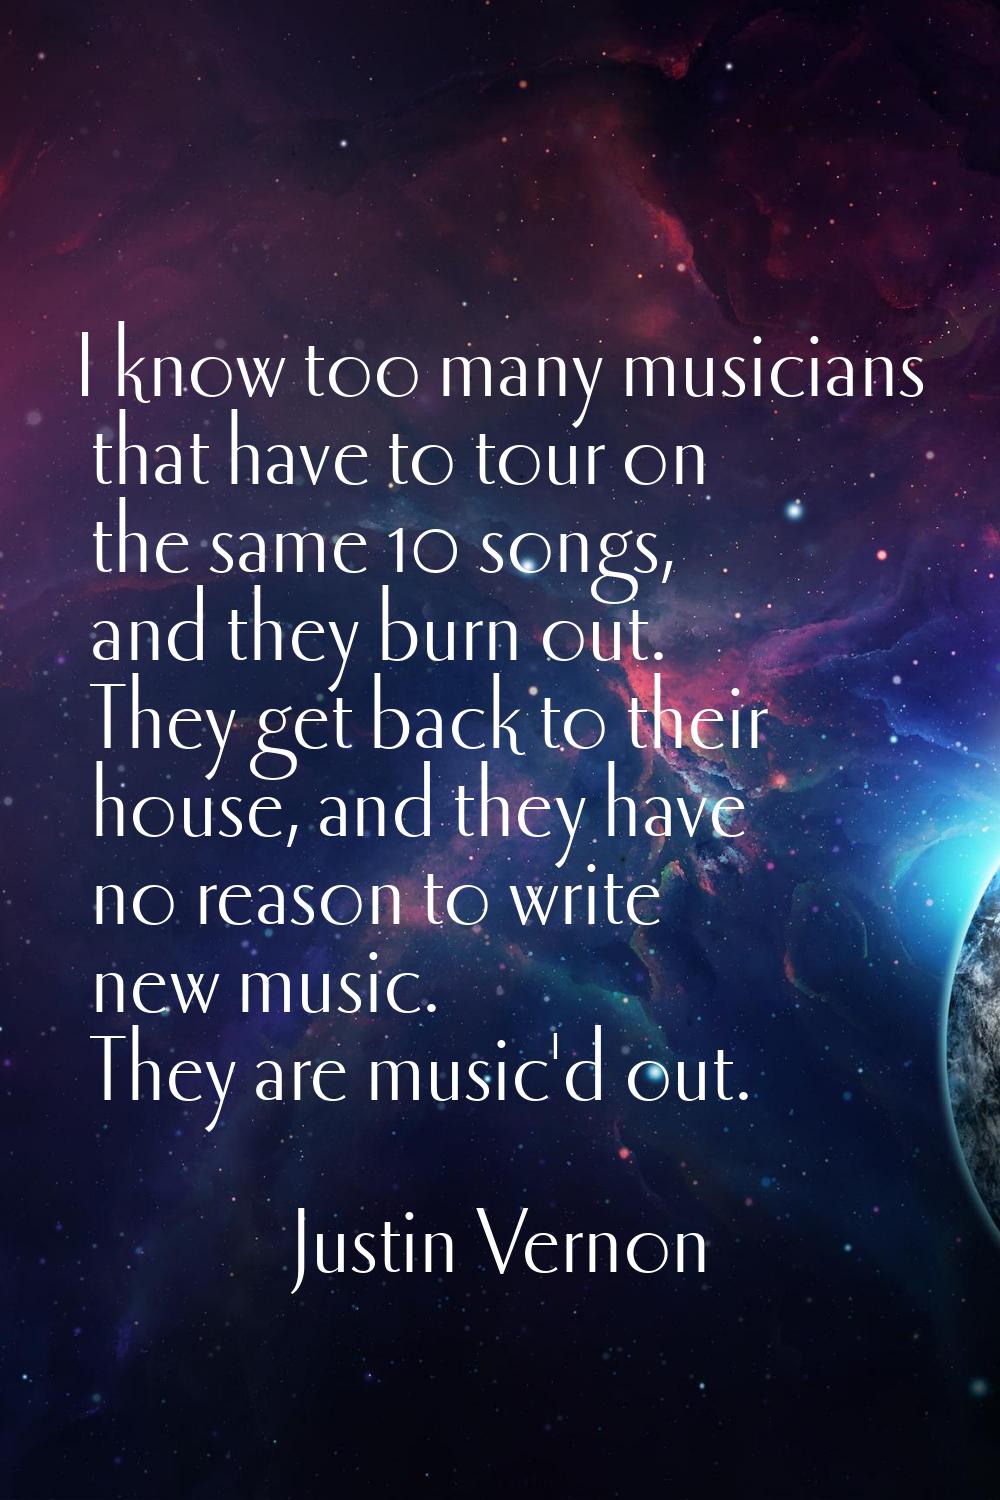 I know too many musicians that have to tour on the same 10 songs, and they burn out. They get back 